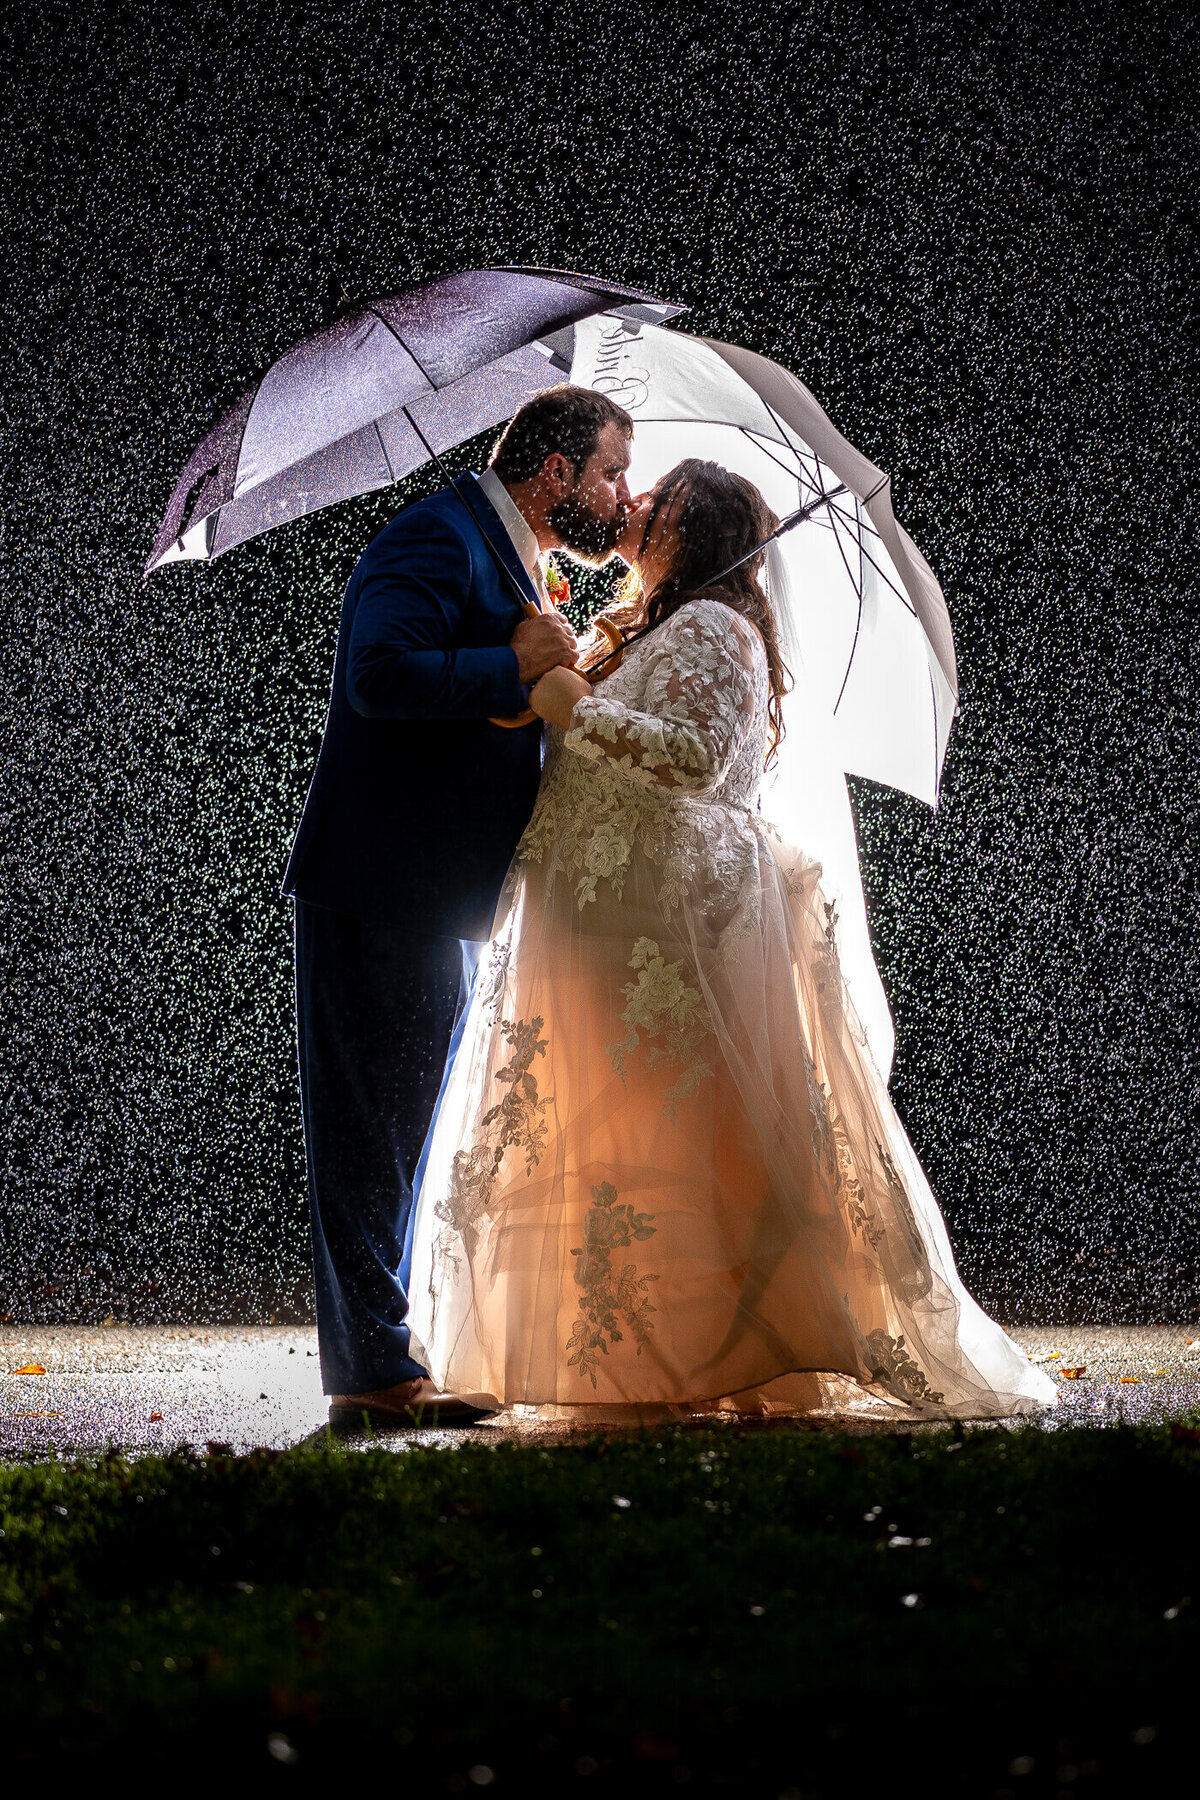 Dramatic Pittsburgh wedding photography of a couple kissing in the rain while holding umbrellas and being illuminated by flash, captured at Brady's Run Lodge in Beaver County PA